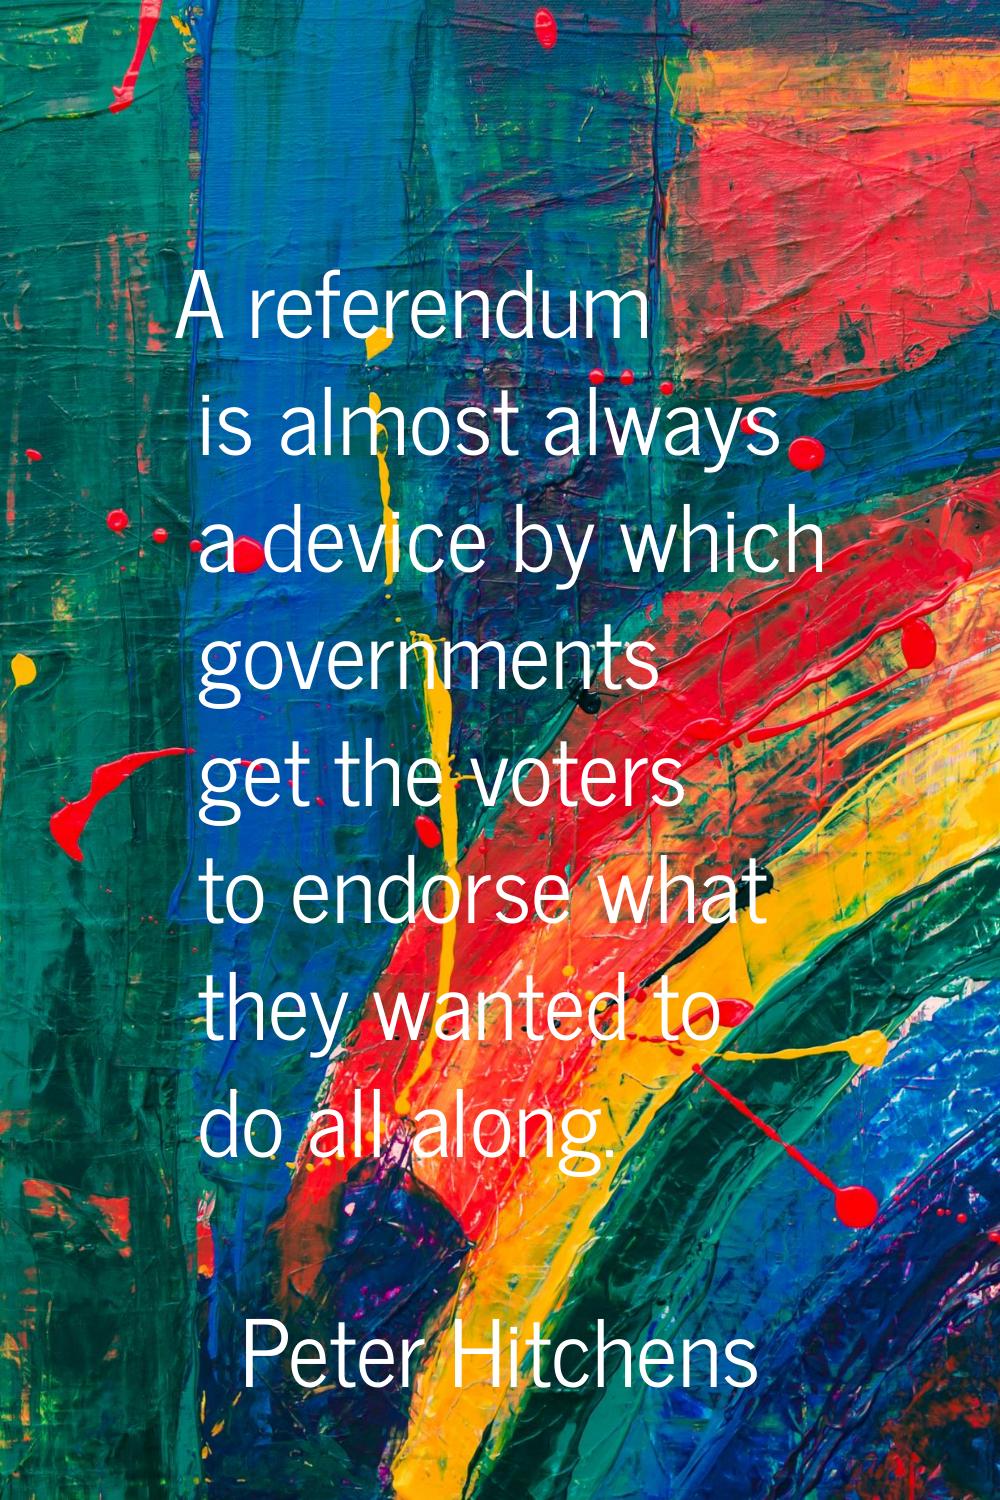 A referendum is almost always a device by which governments get the voters to endorse what they wan